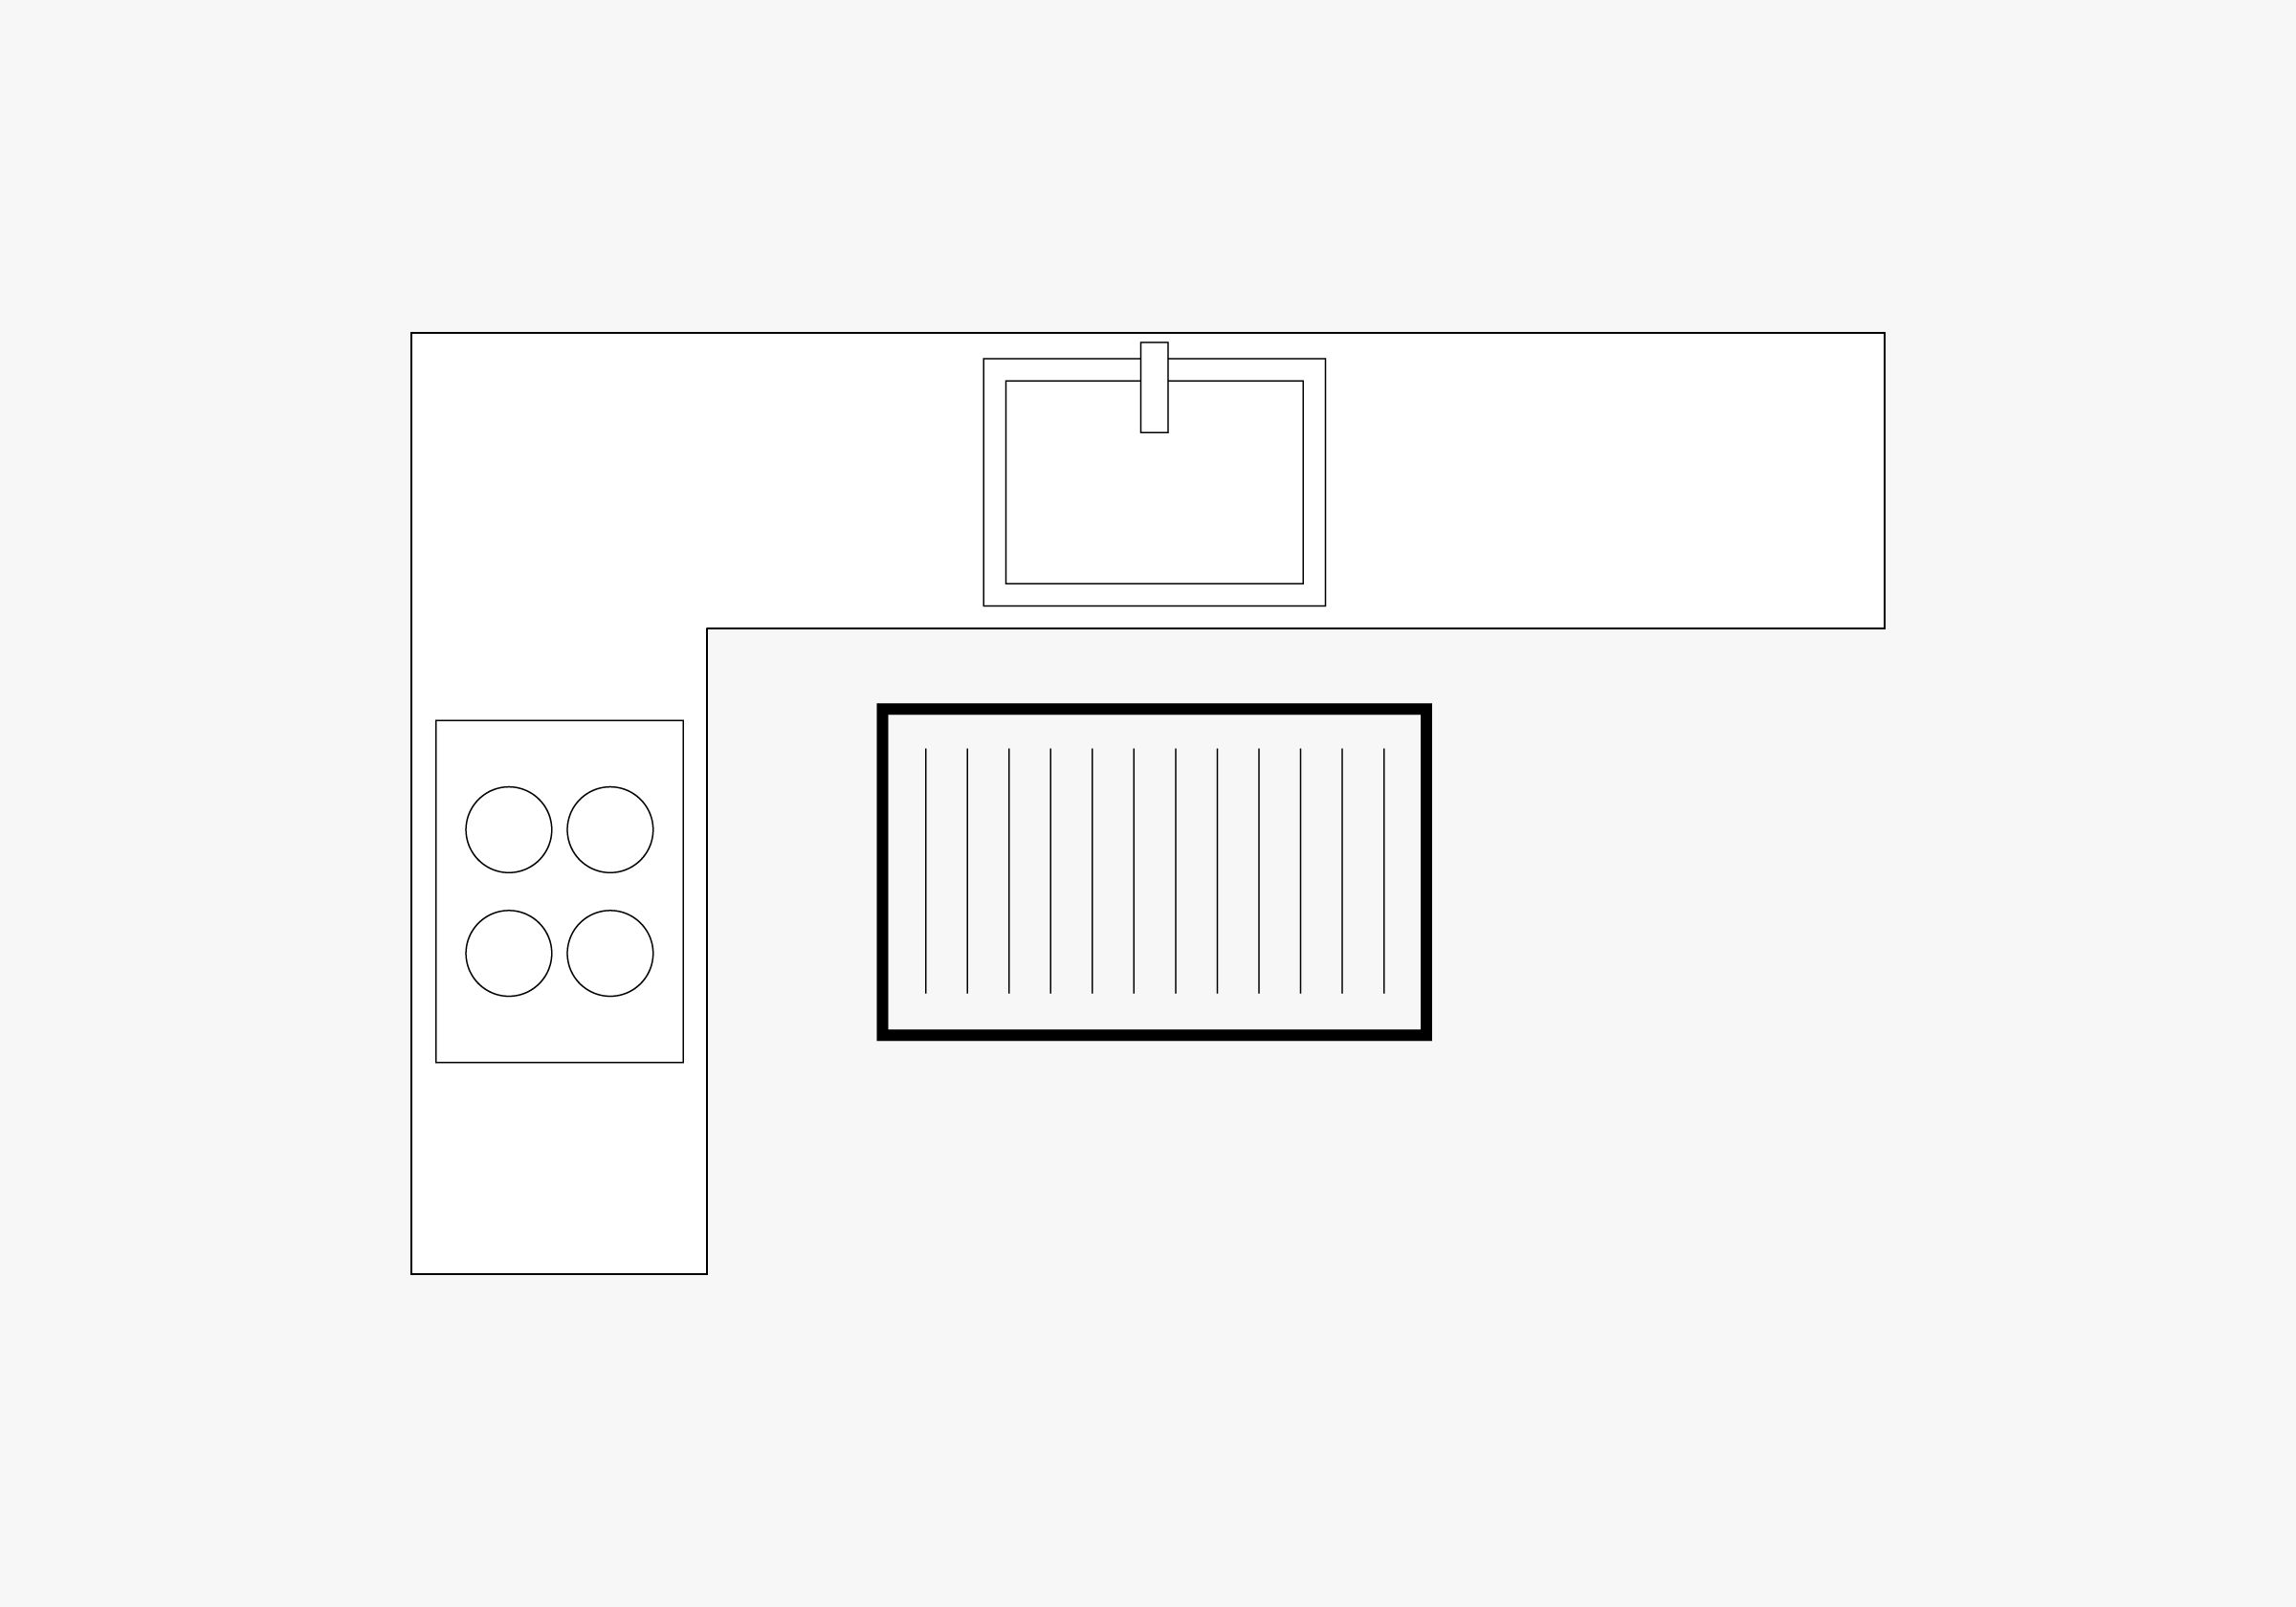 Example Placement: Kitchen Small (60 x 90cm)